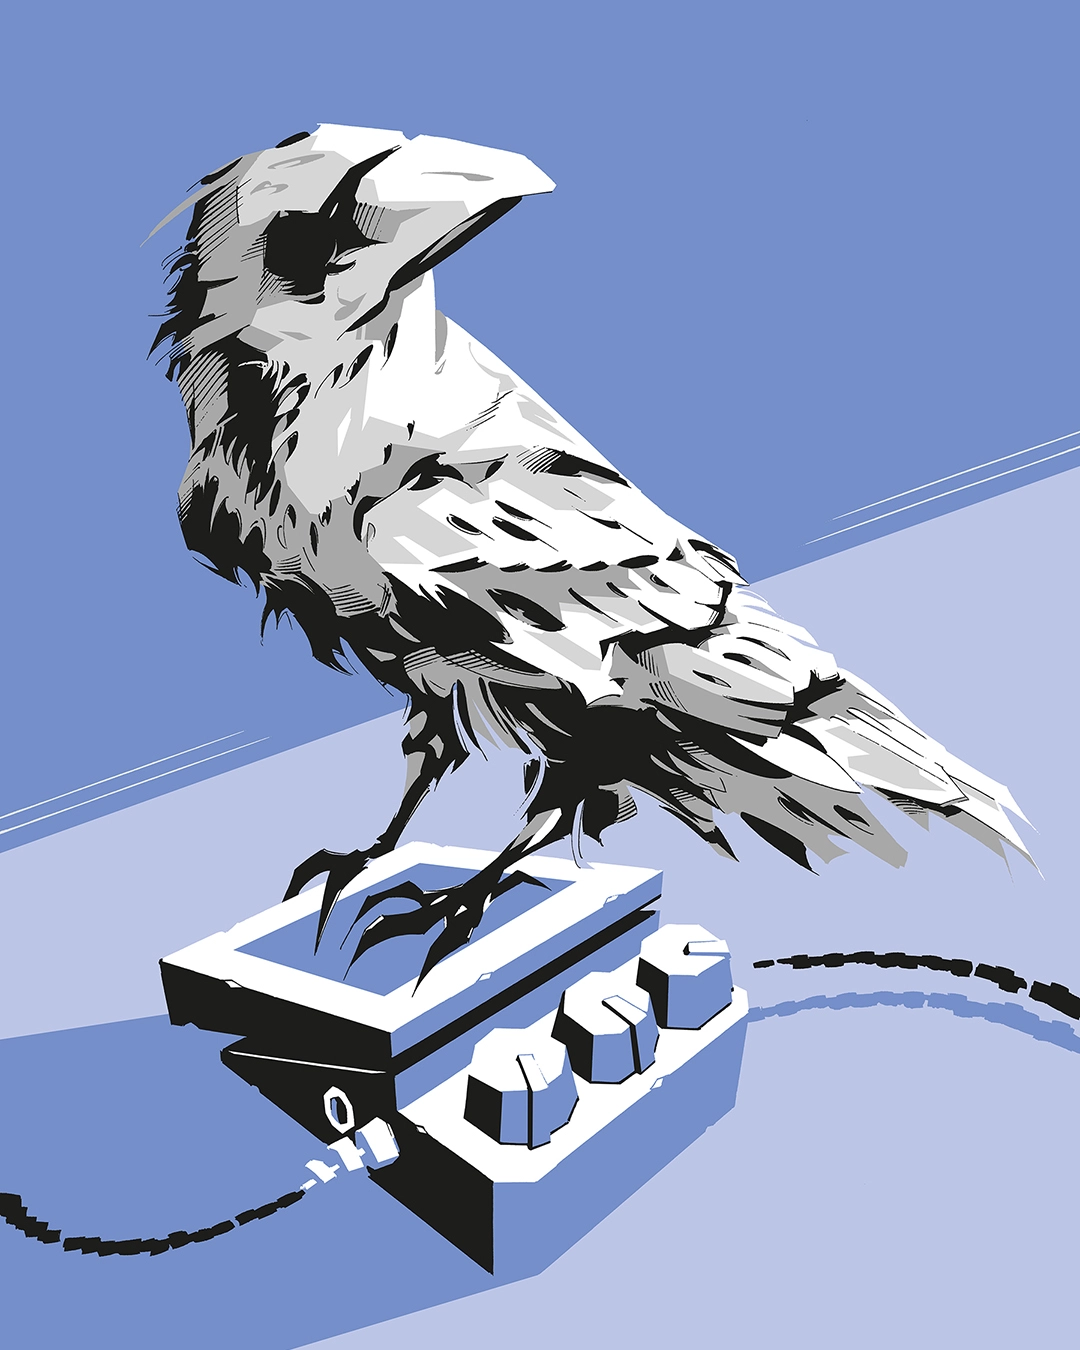 Illustration of a raven perched upon a distortion pedal.